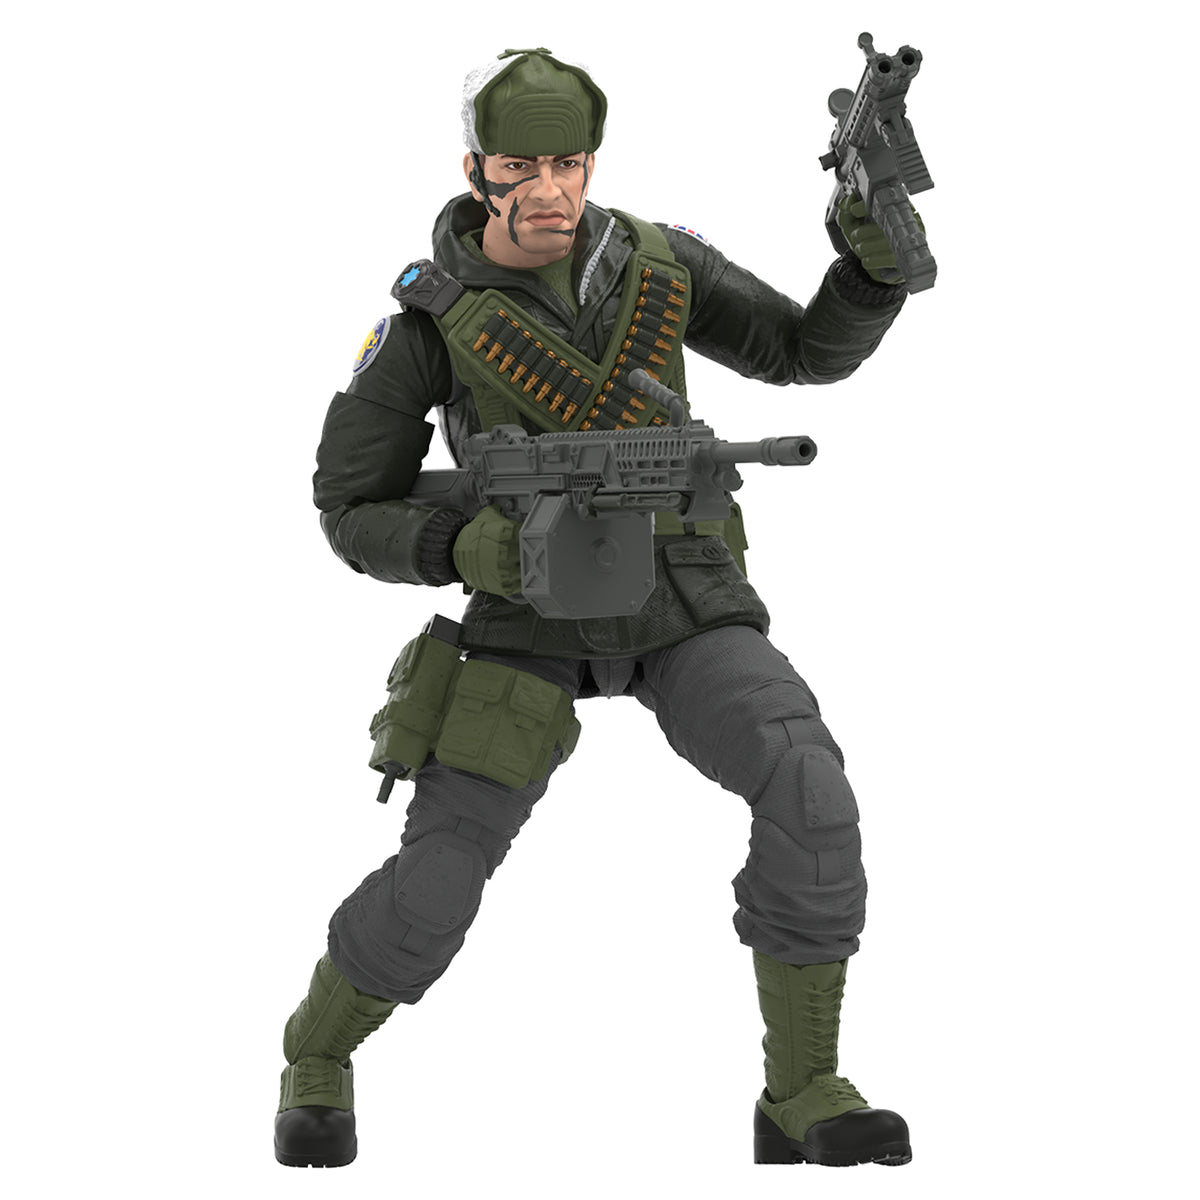  G.I. Joe Classified Series Robert Grunt Graves,Collectible  Action Figure,87,6-Inch Action Figures for Boys & Girls,with 8 Accessories  : Toys & Games